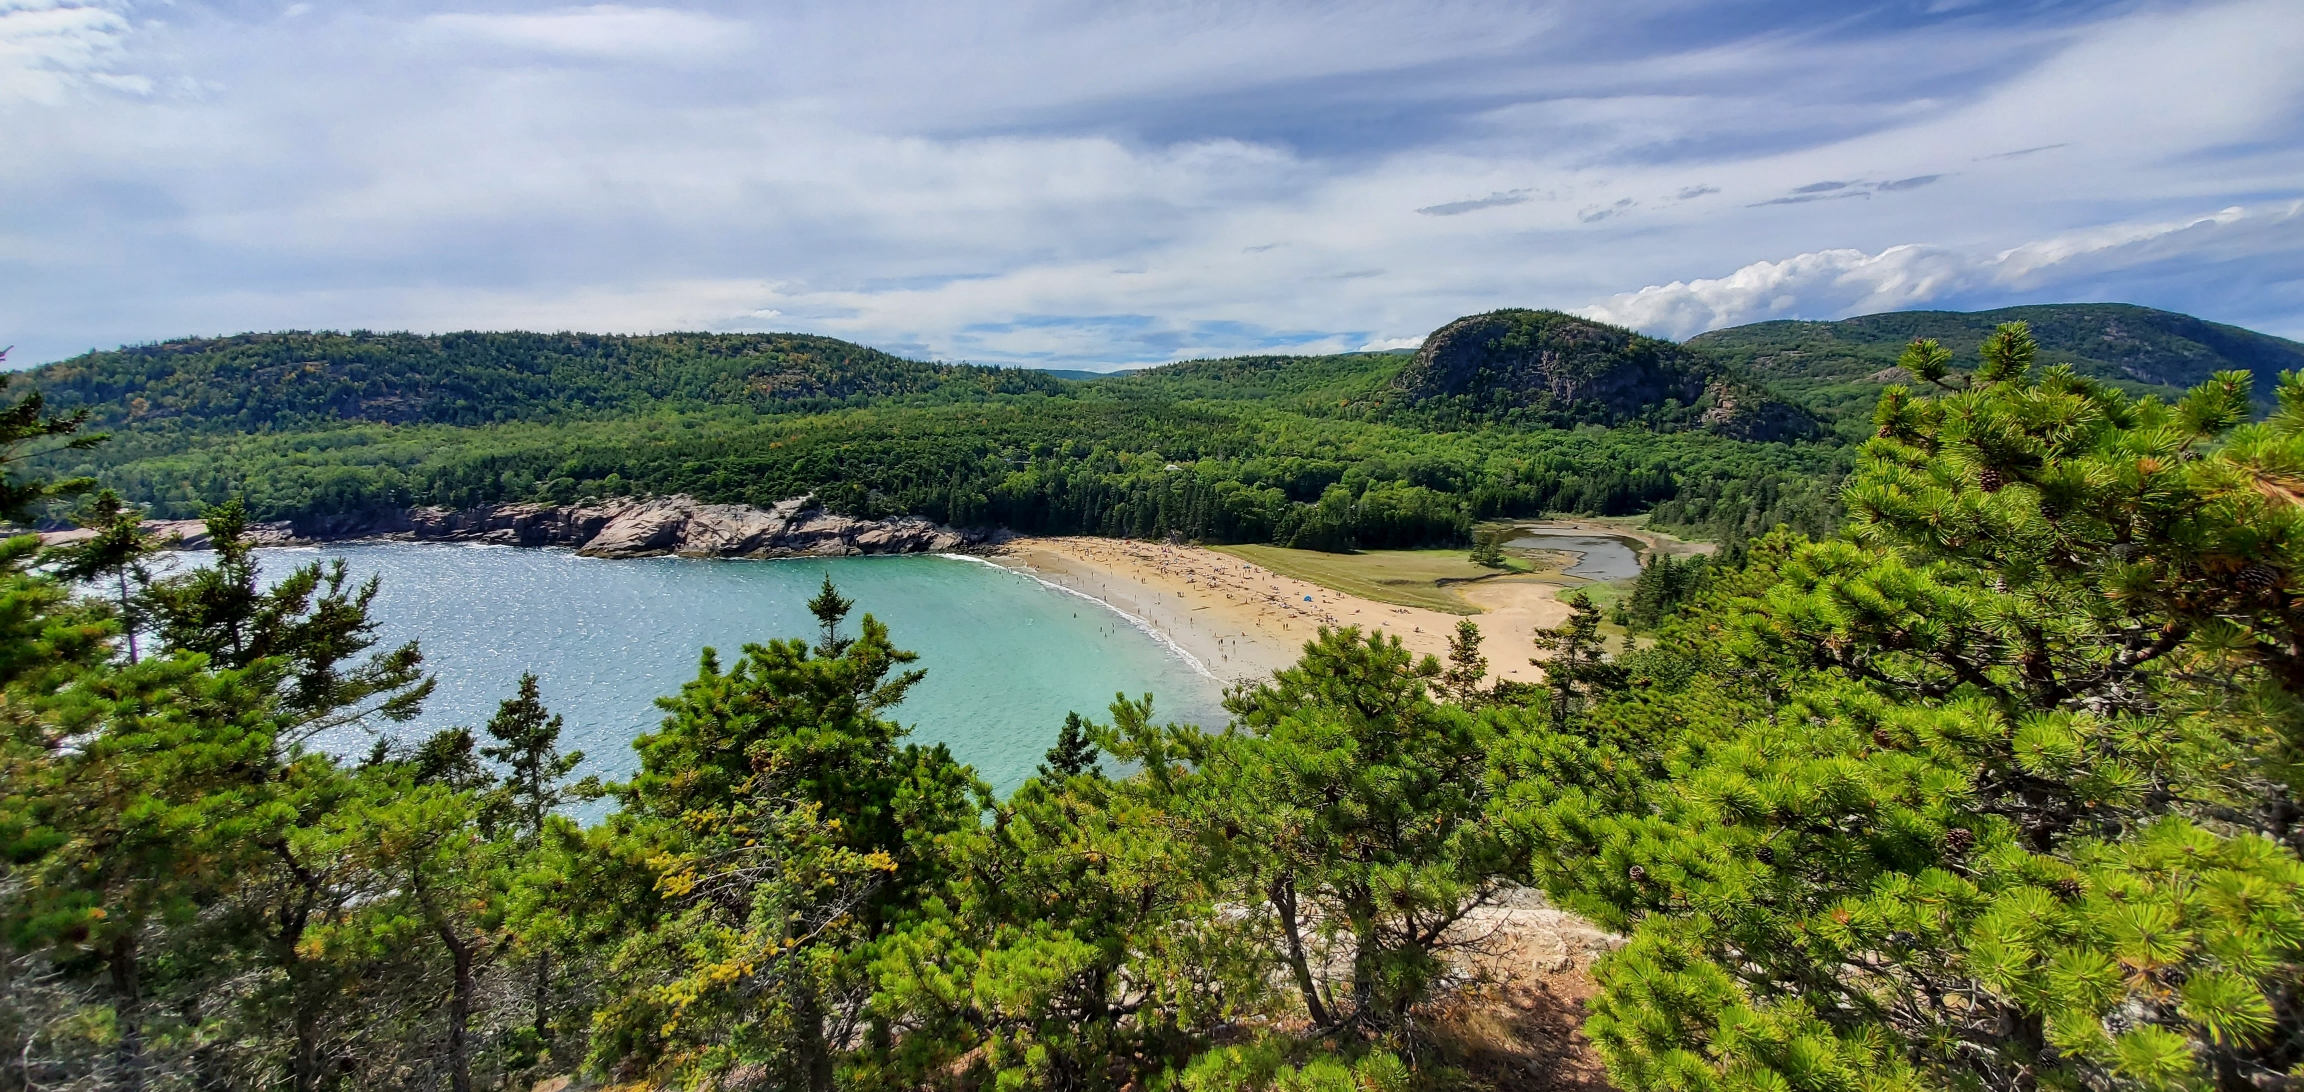 Sand Beach Located in Acadia National Park